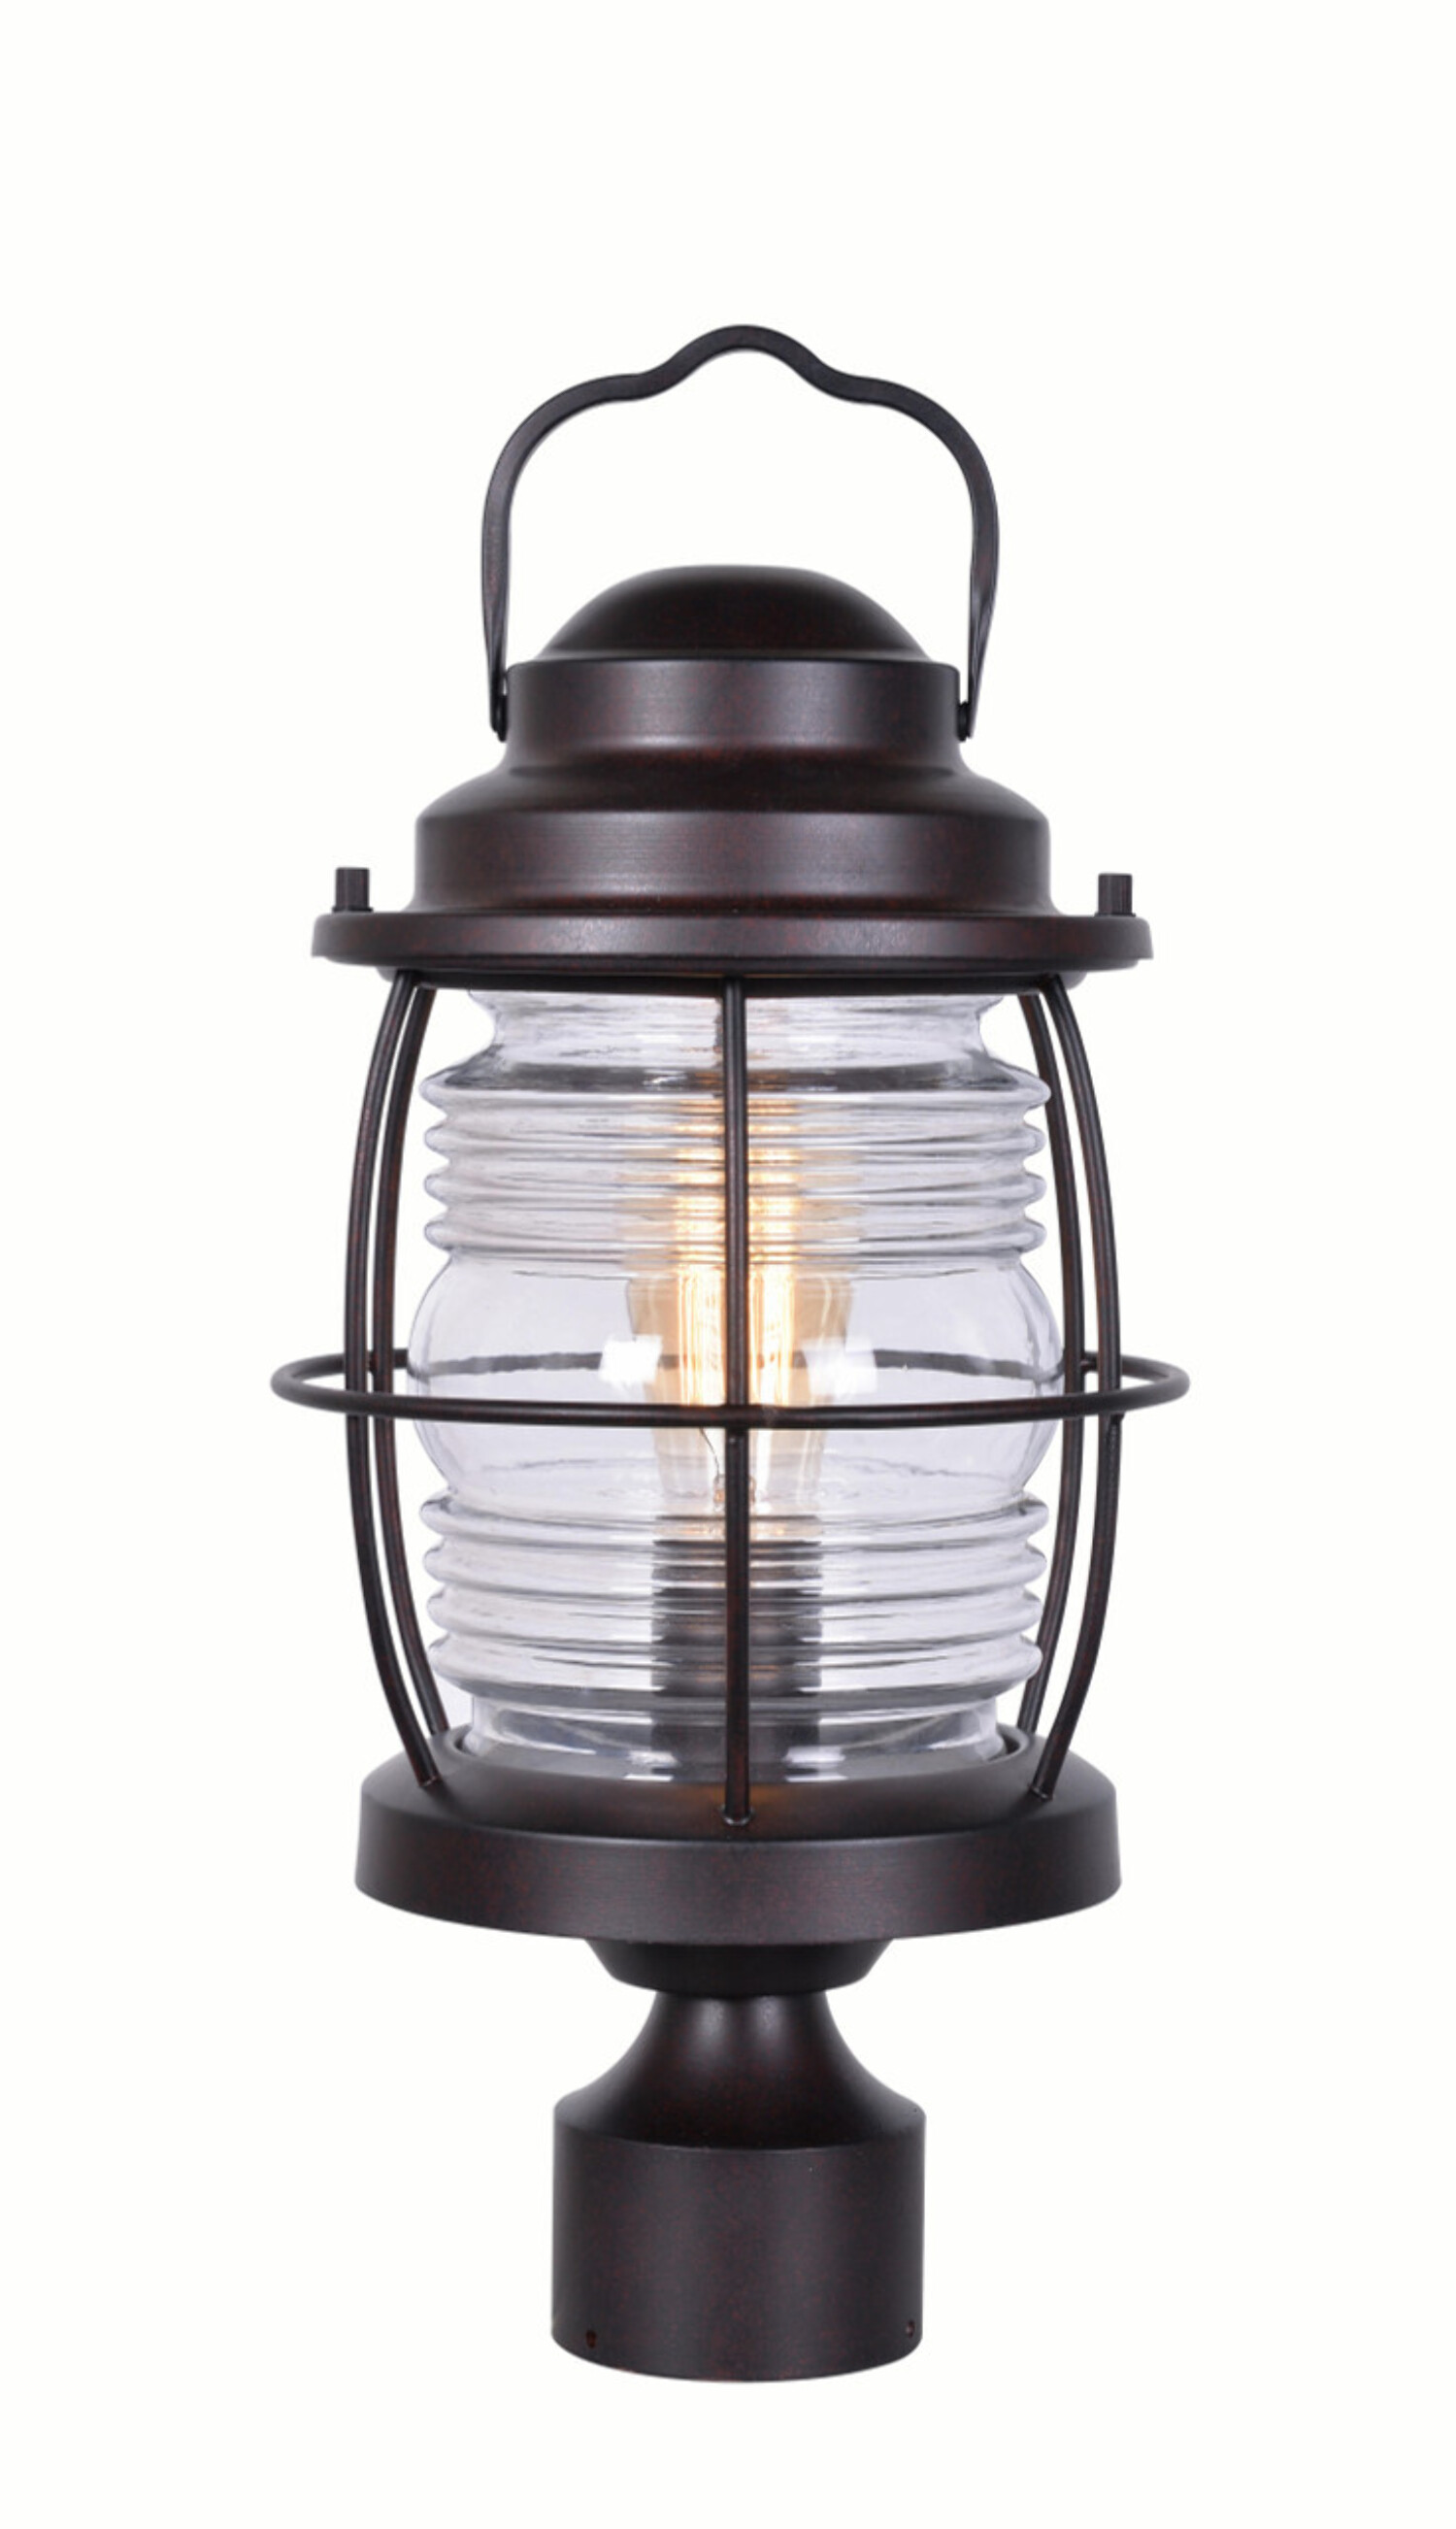 Beacon 1 Light Post Lantern with Copper Finish - image 2 of 8